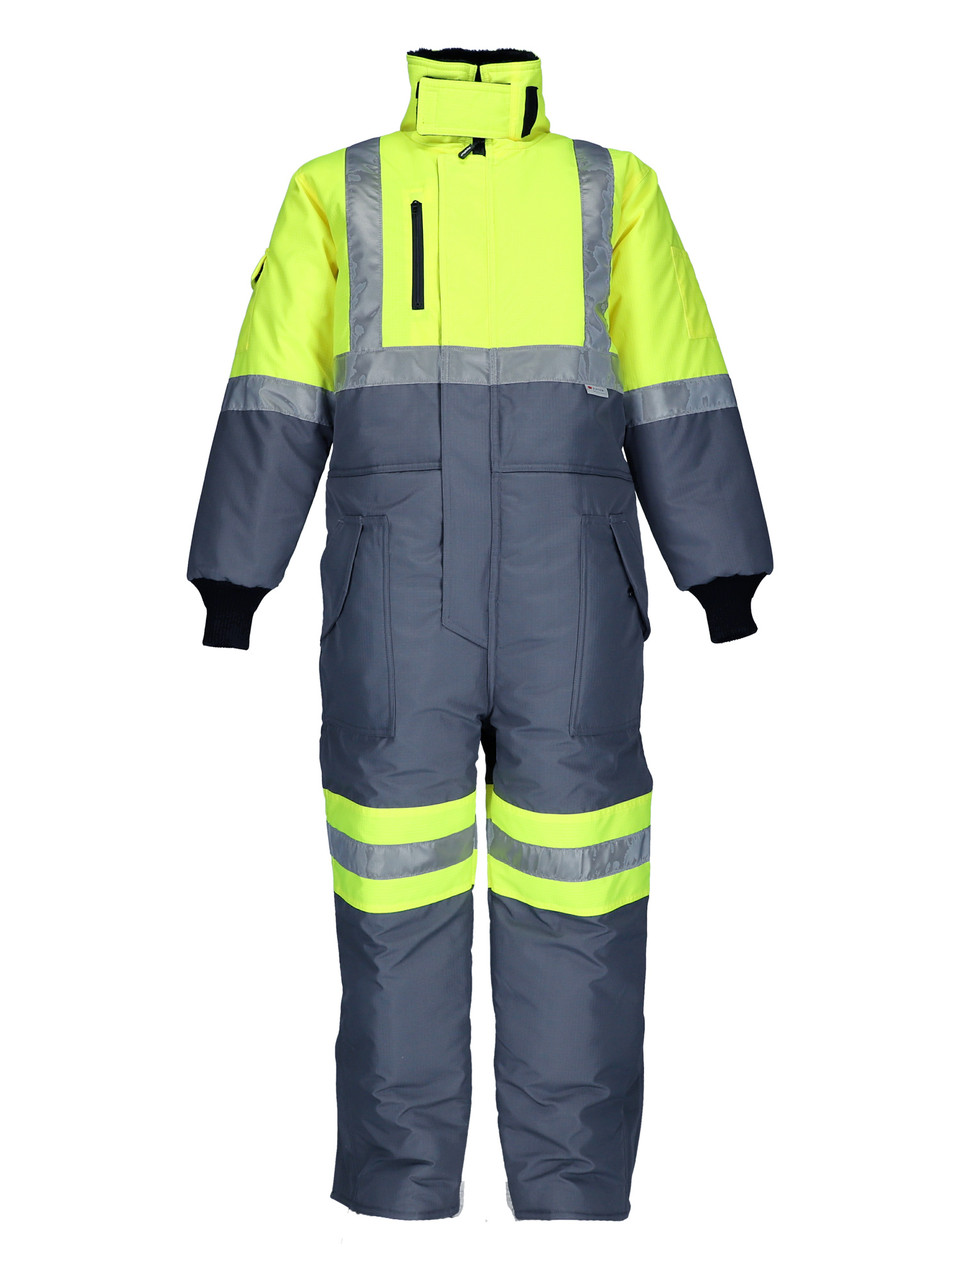 Refrigiwear Freezer Edge Insulated Coveralls (Lime Gray, 2XL)